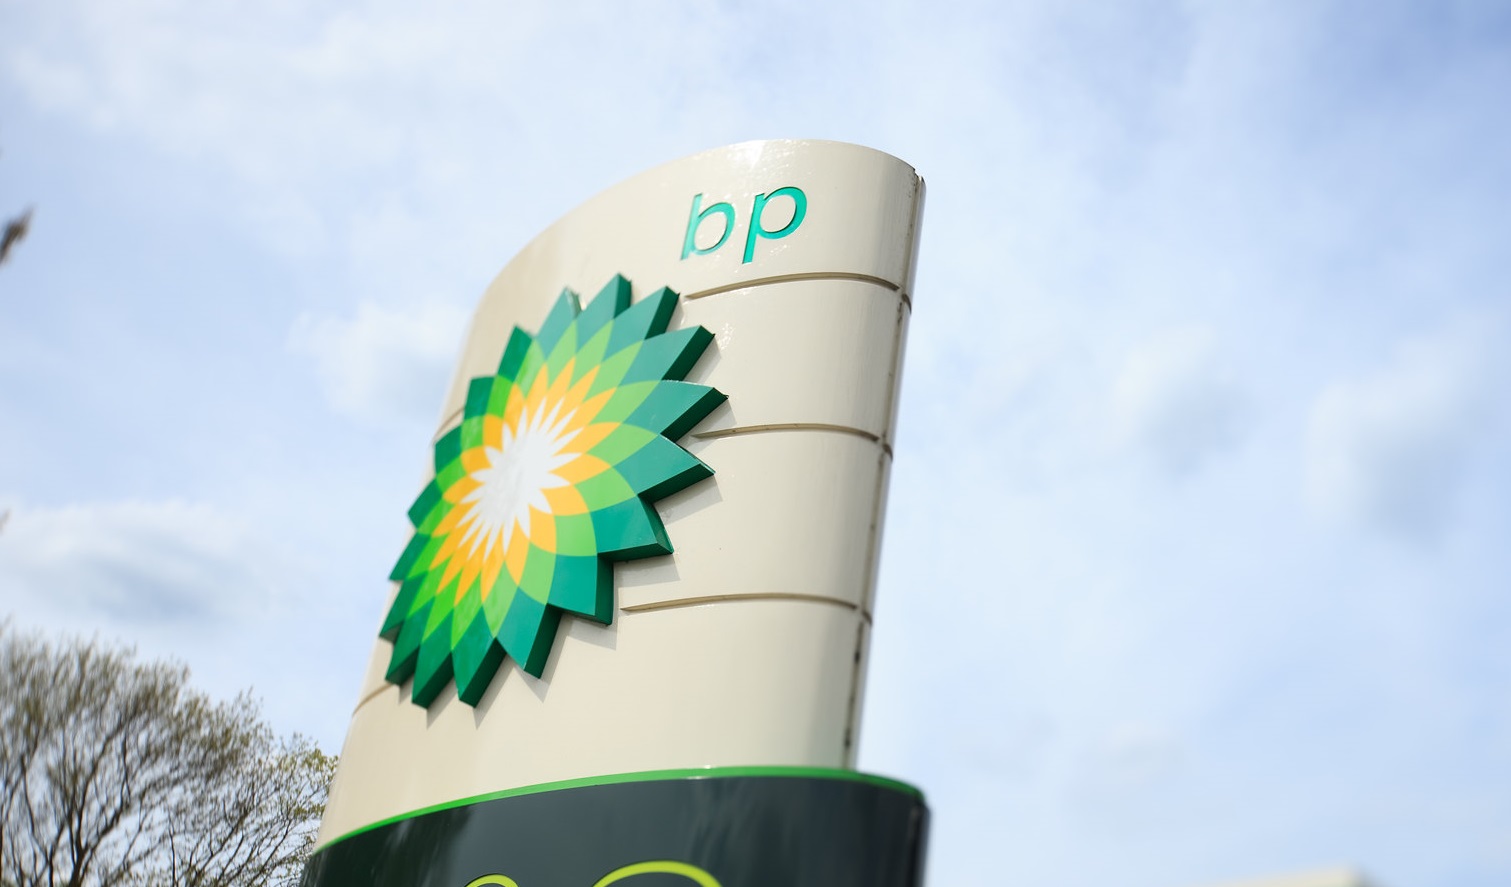 bp Acquires Landfill Gas-to-Bioenergy Company Archaea for $4.1 Billion